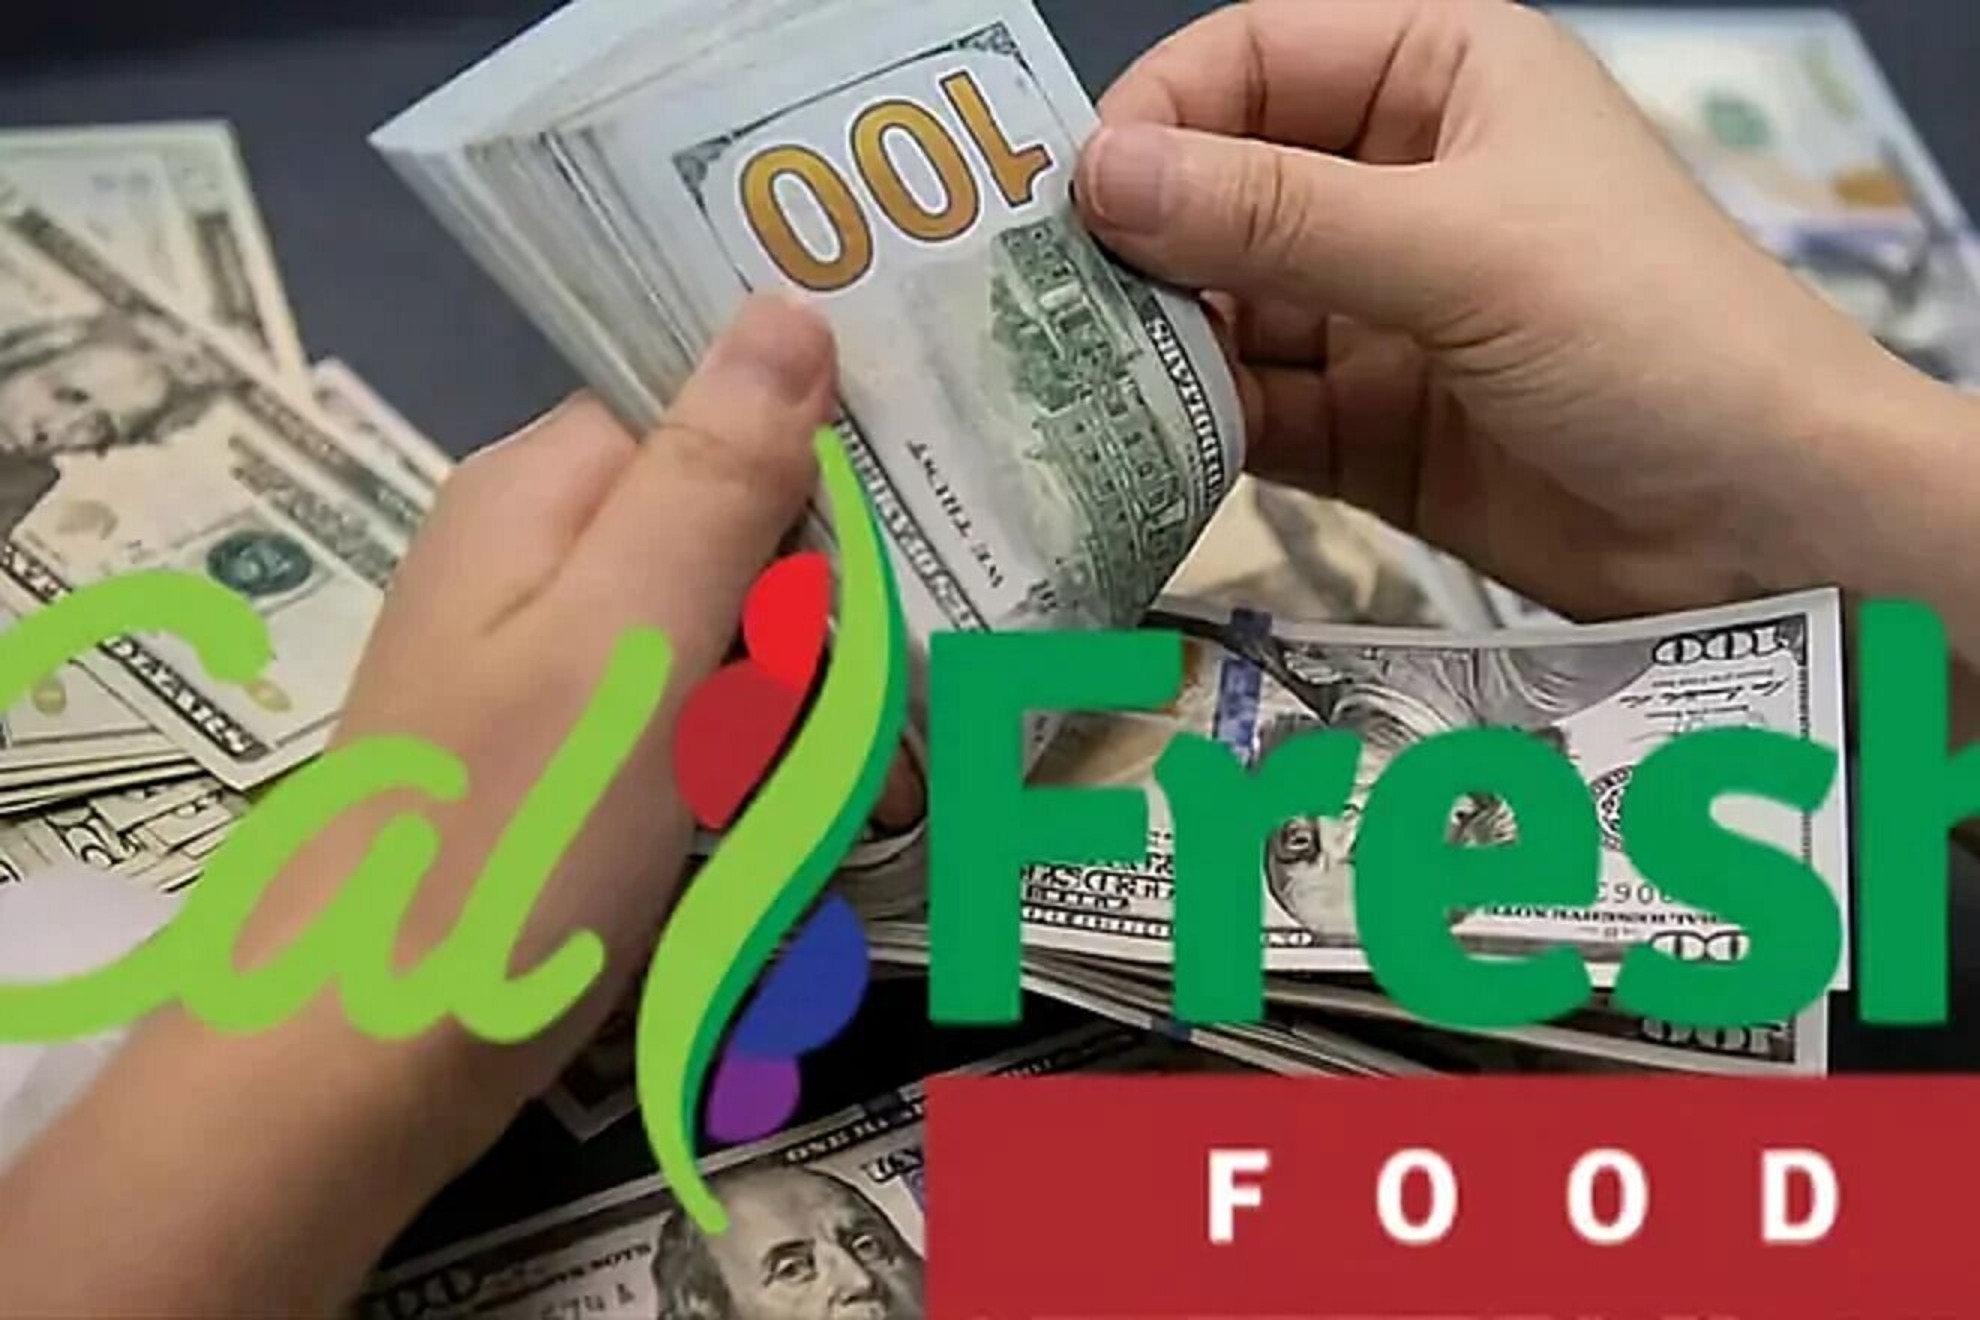 CalFresh January Payment: What days will they pay during the next month and how much will you receive?